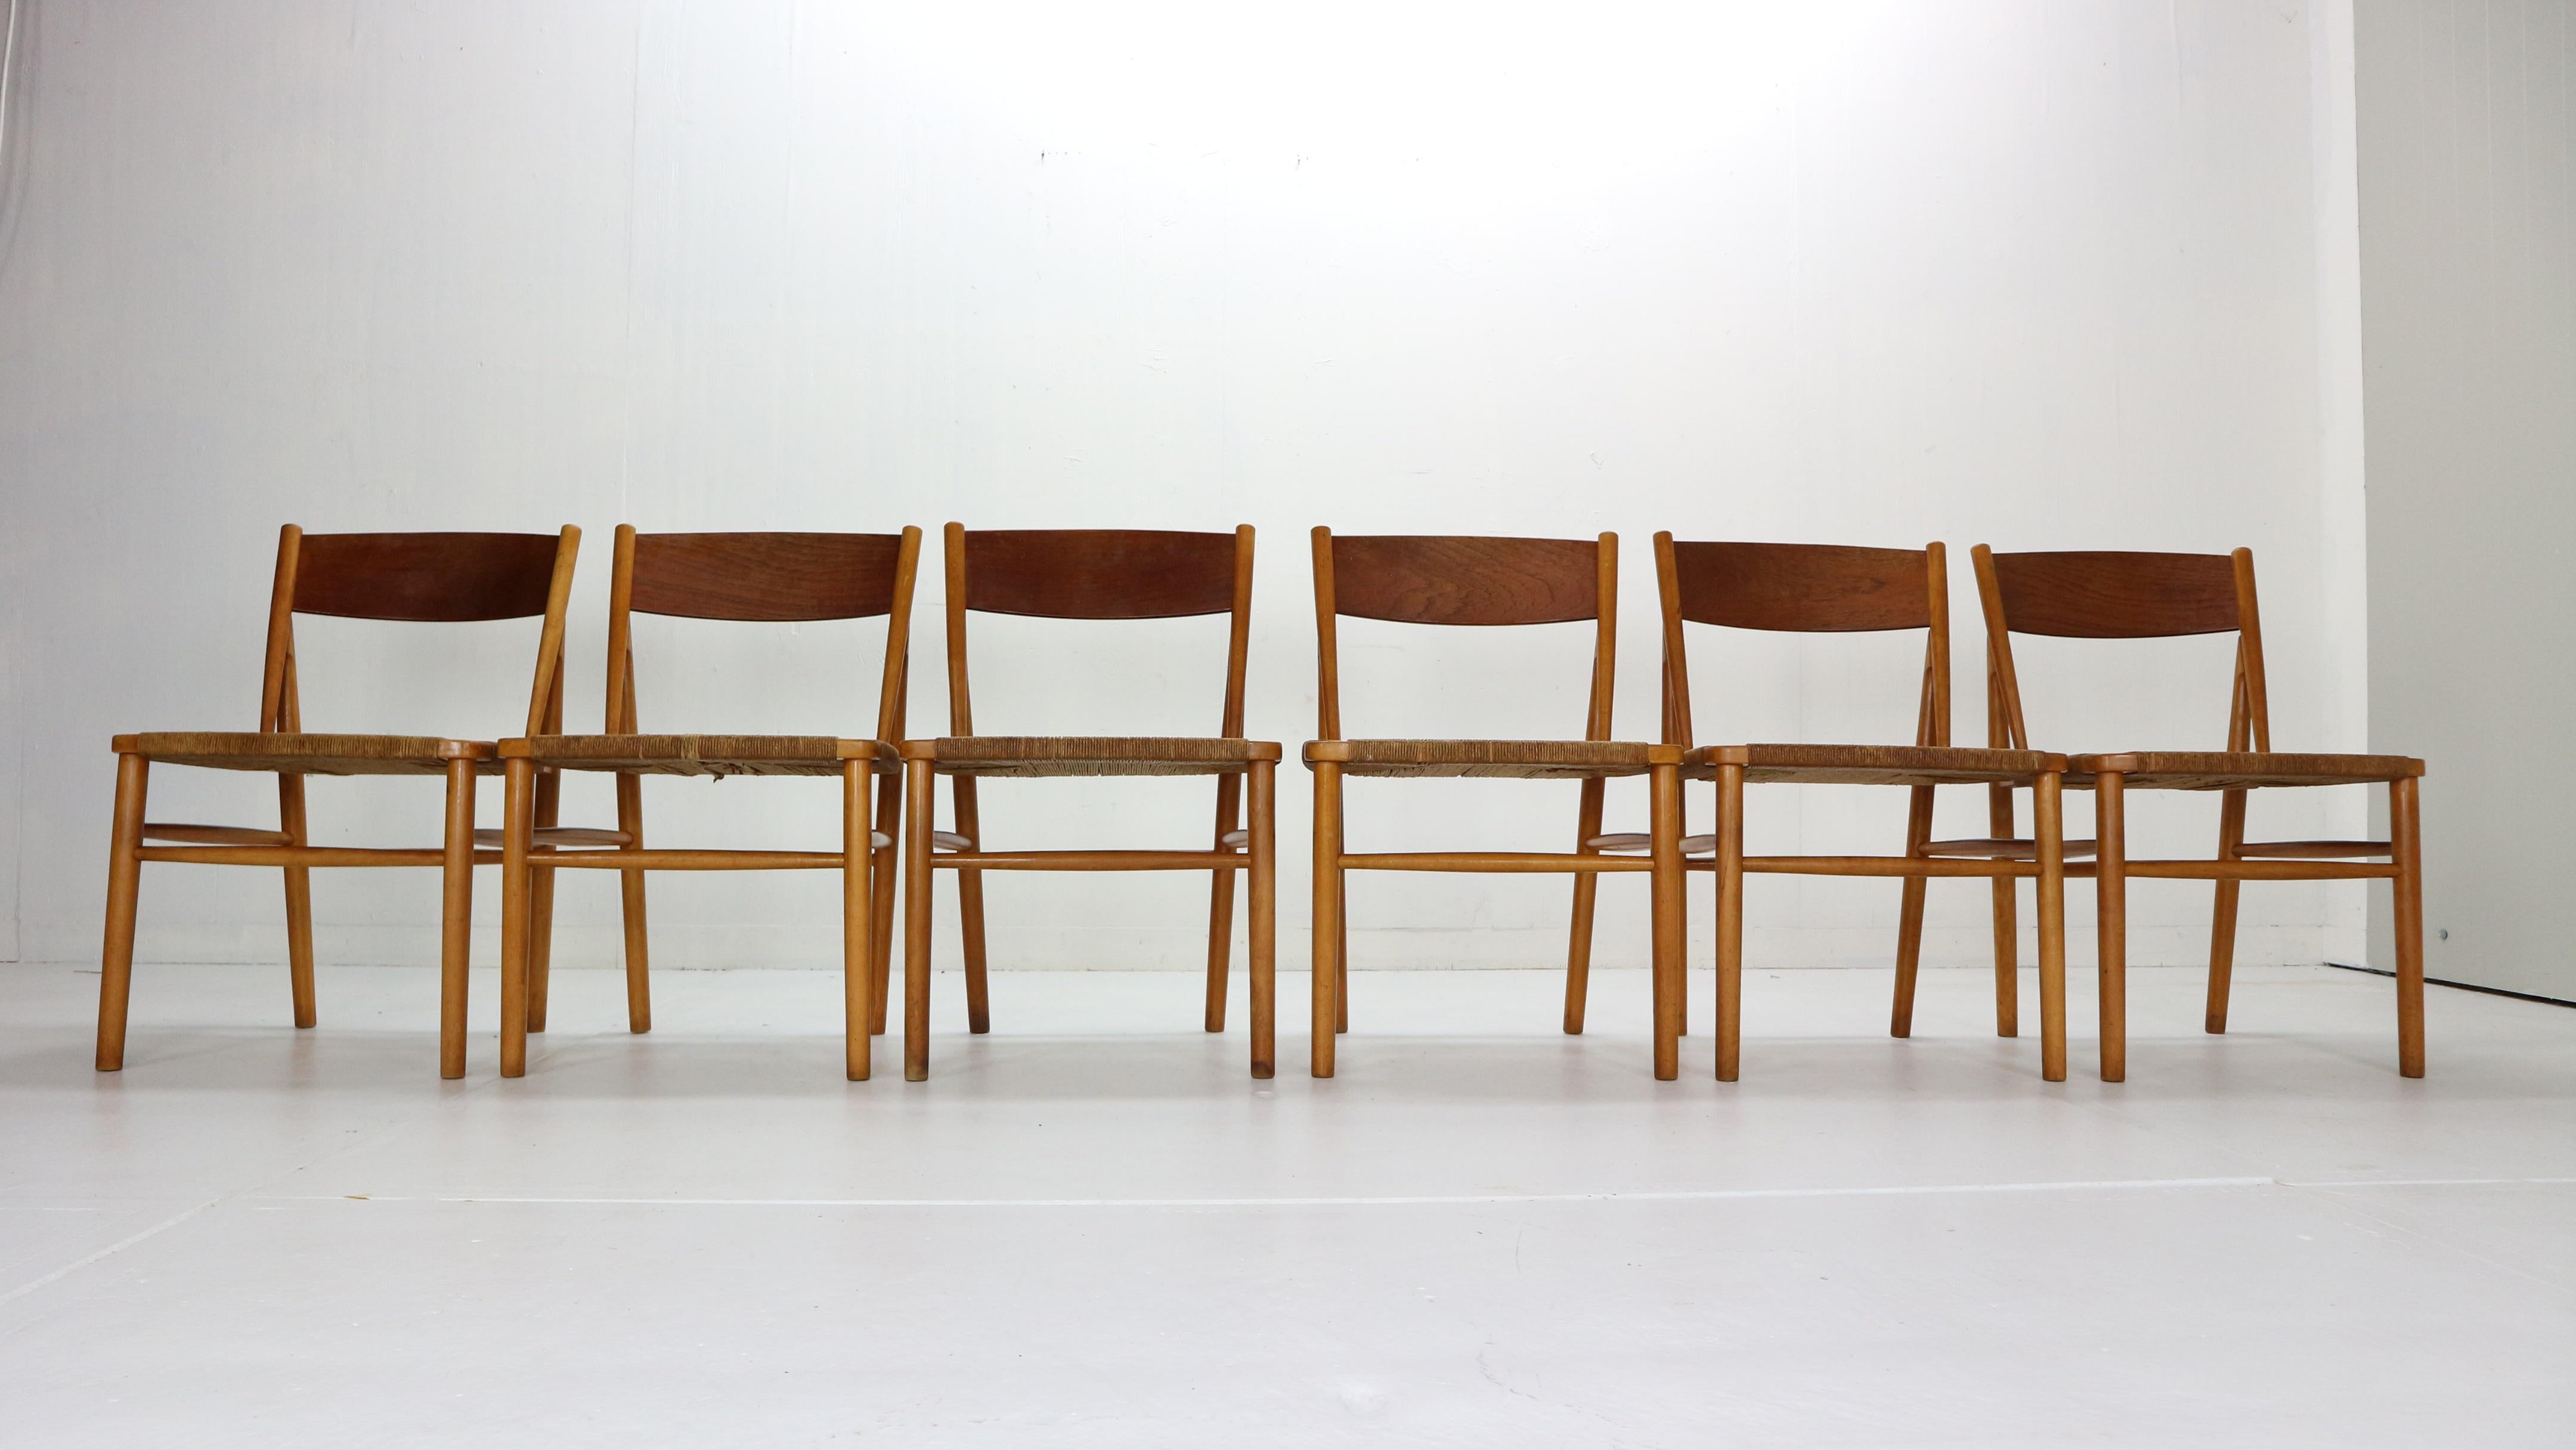 Scandinavian Modern period set of 6 dinning room chairs designed by Børge Mogensen for Søborg Møbler manufacture in 1950s period, Denmark.
Model No. 157.
rare model!
Teak framed dining chairs with handwoven original paper cord seating. The cord